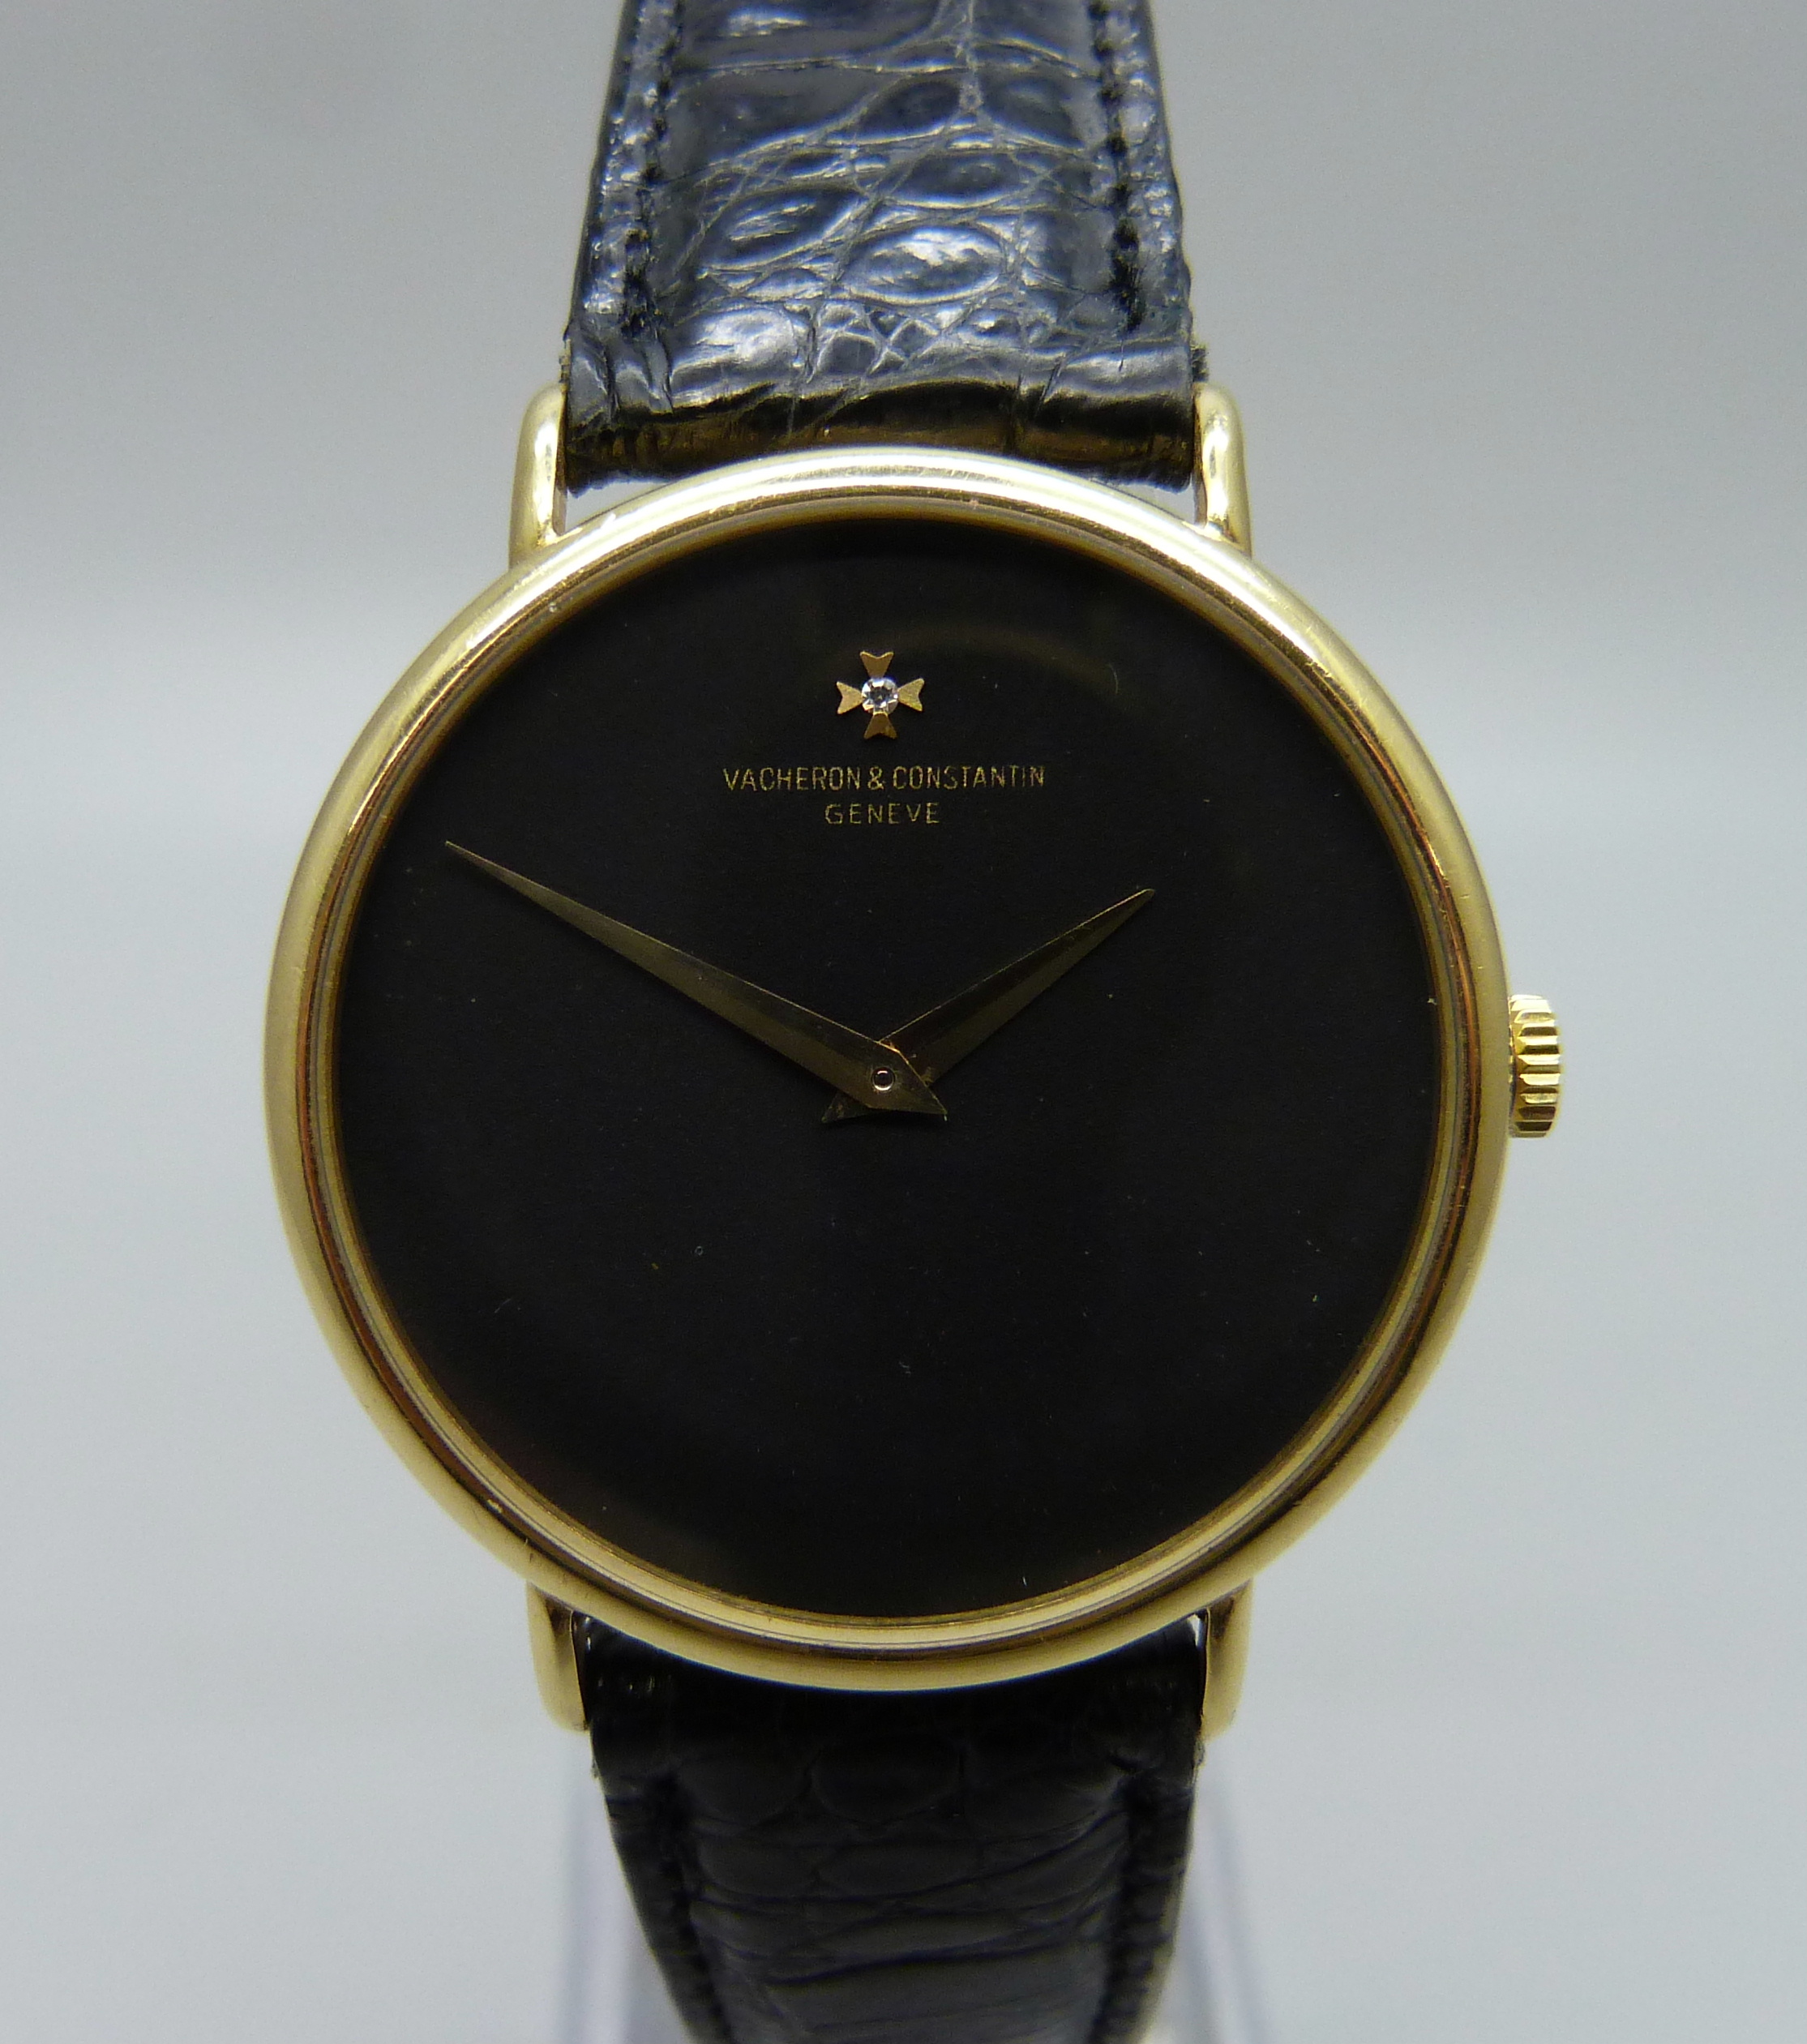 An 18ct gold Vacheron & Constantin Geneve dress wristwatch, the 33mm case marked 520950, on a - Image 4 of 7